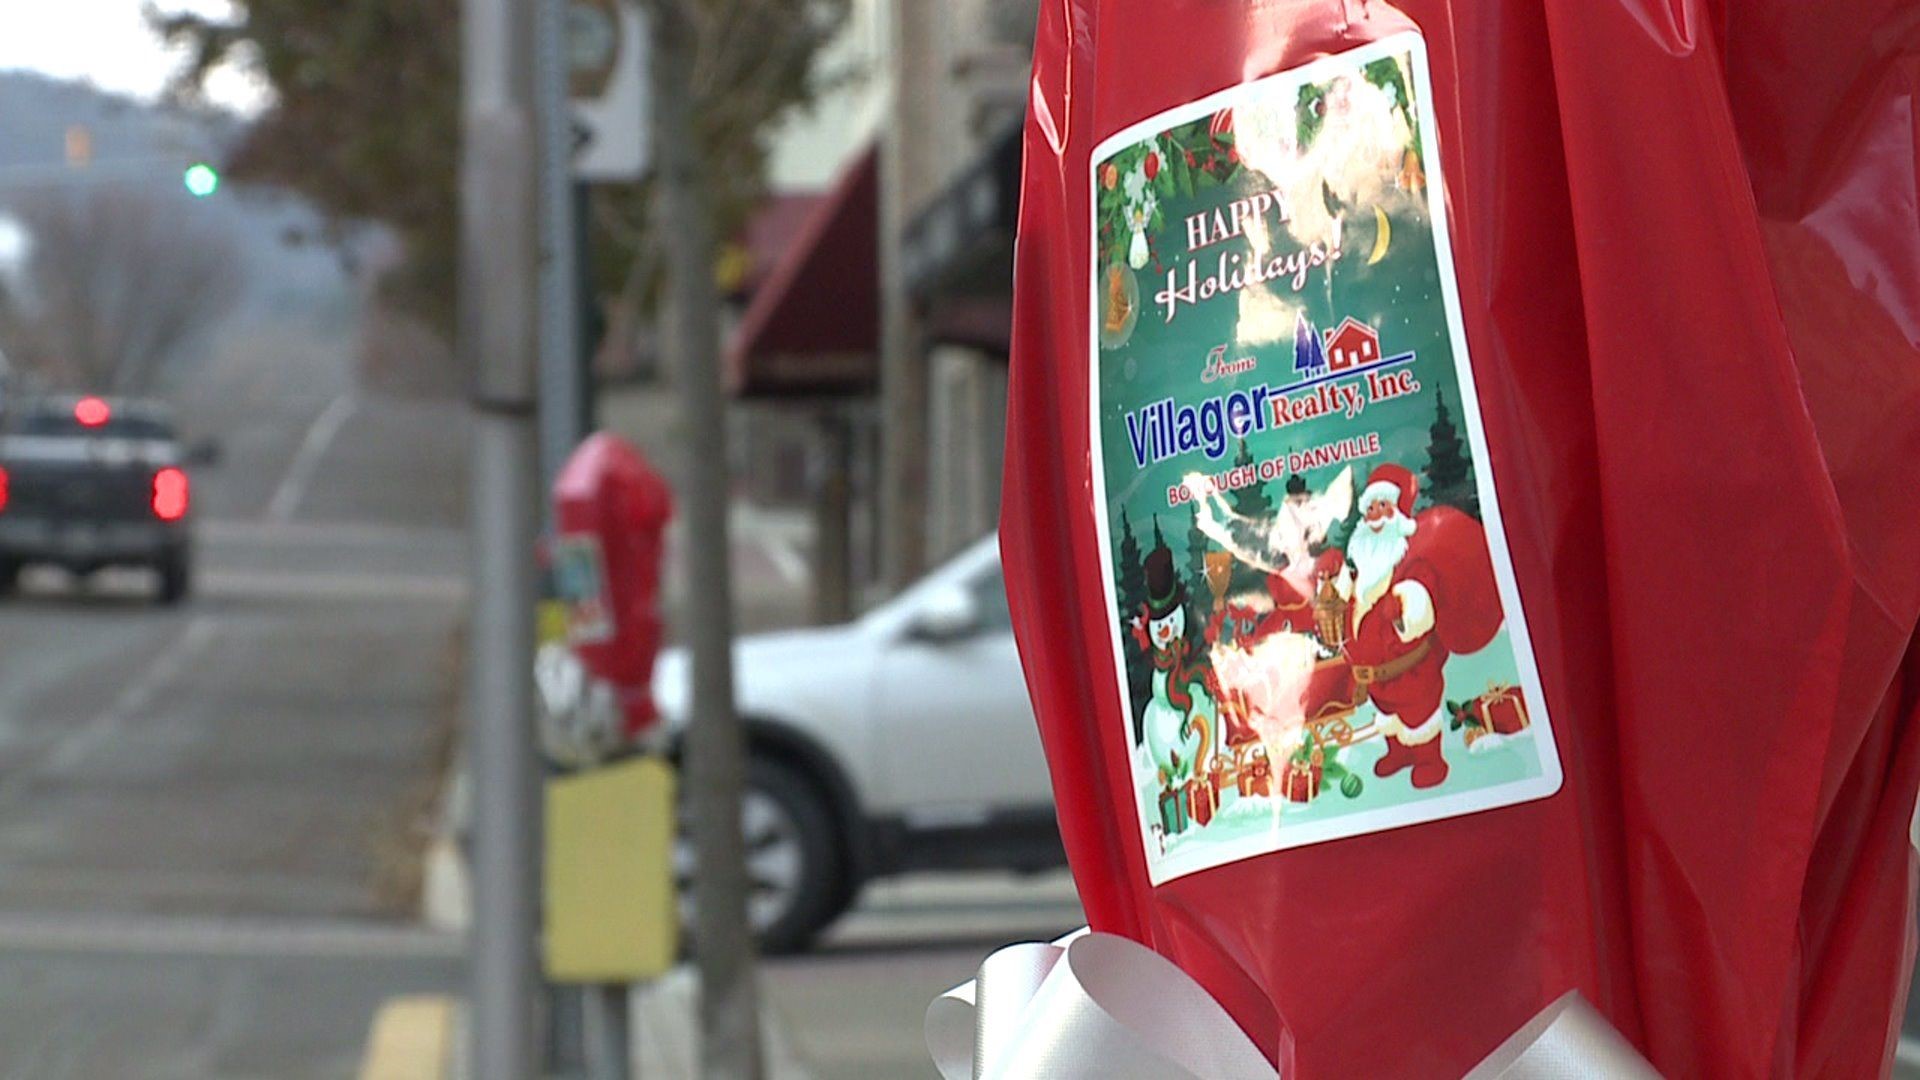 Free Parking in Danville for Holiday Shoppers